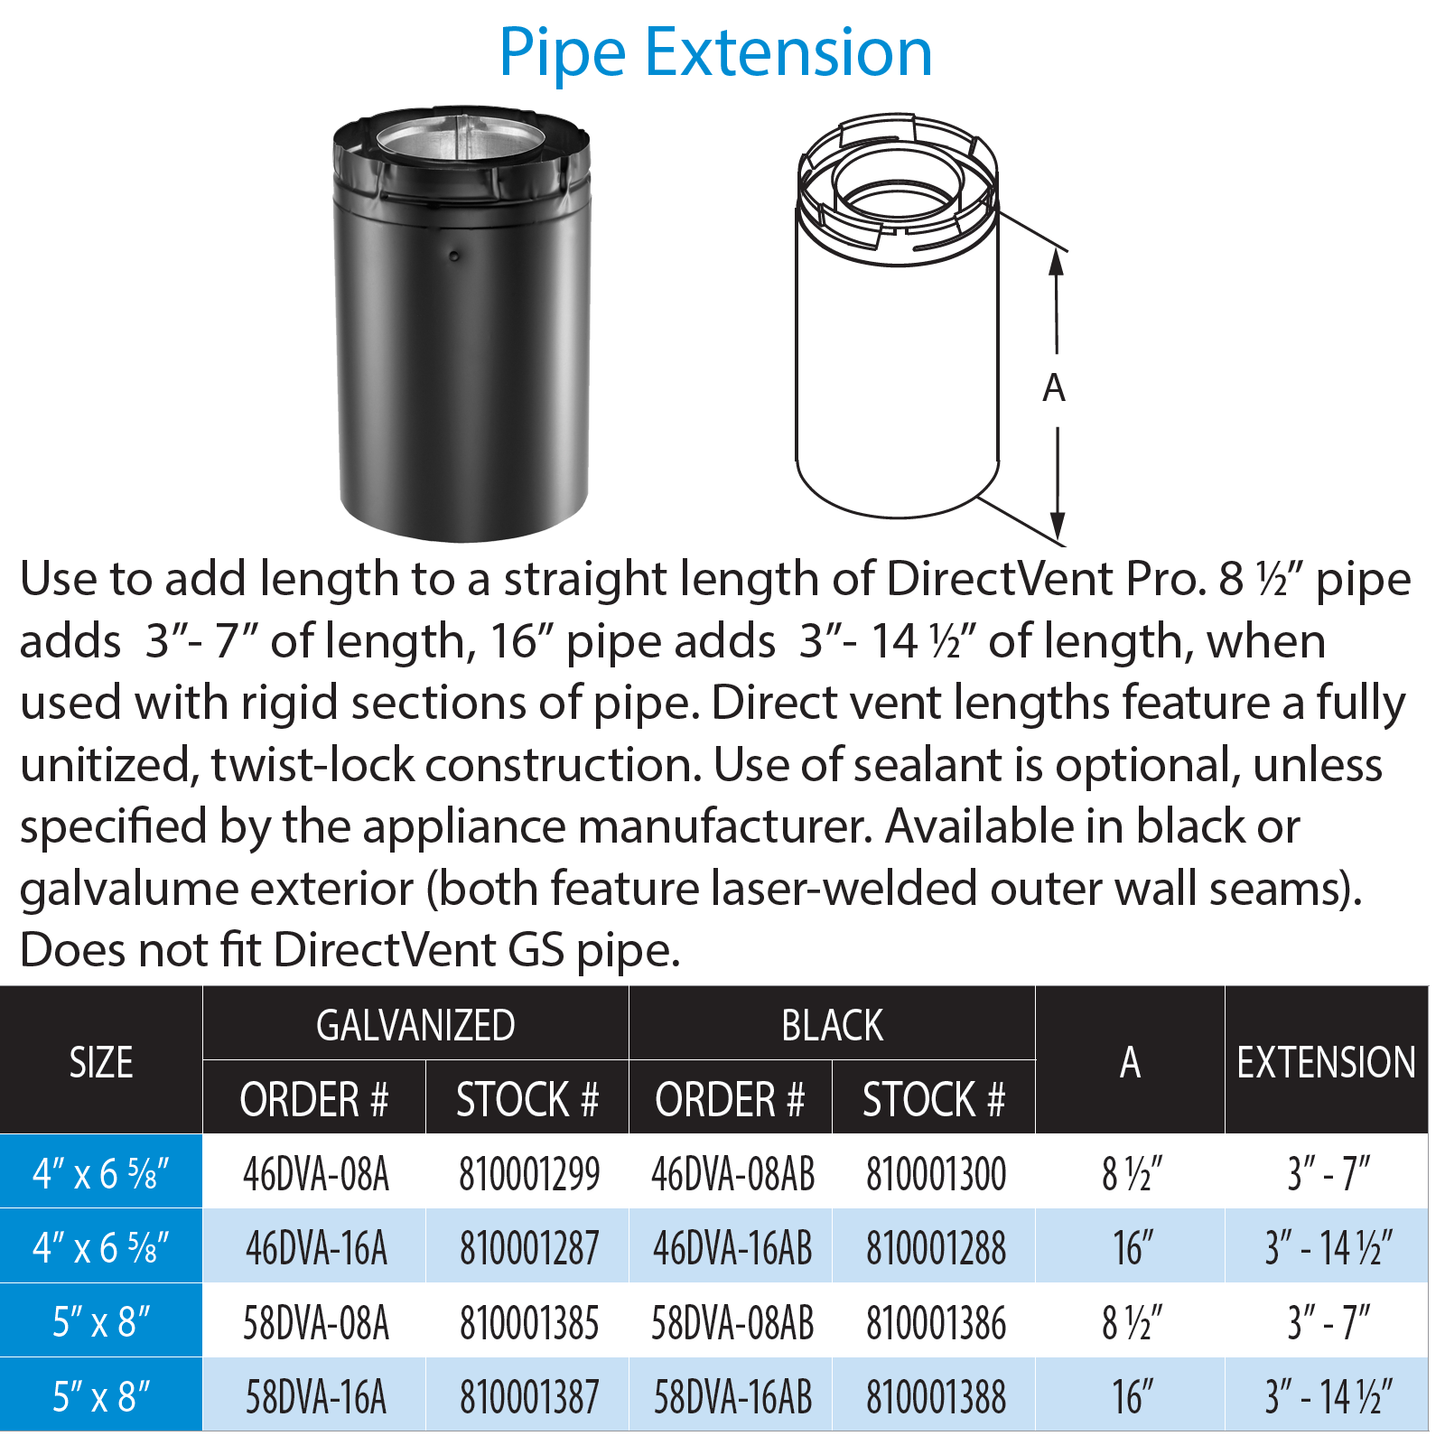 DuraVent DVP 8 1/2 In Pipe Ext (Adjusts 3-7 Inch) - Blk | 46DVA-08AB